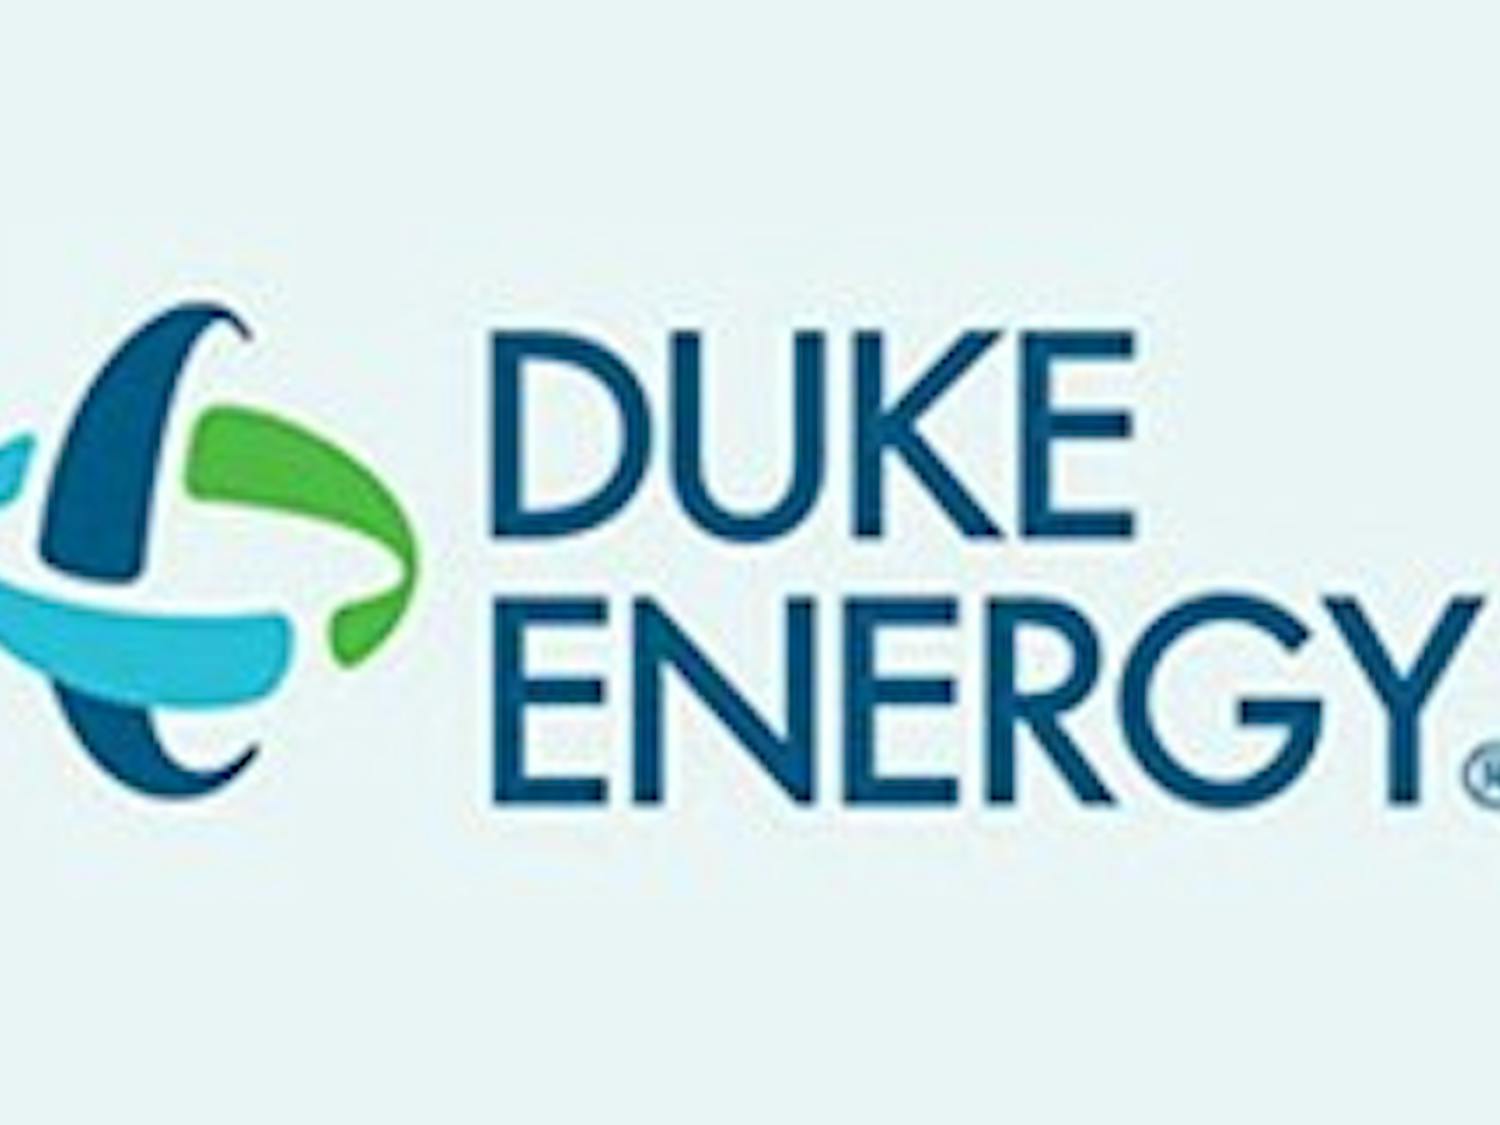 A proposed Duke Energy power plant on campus has been criticized for possible adverse effects on North Carolina communities.&nbsp;